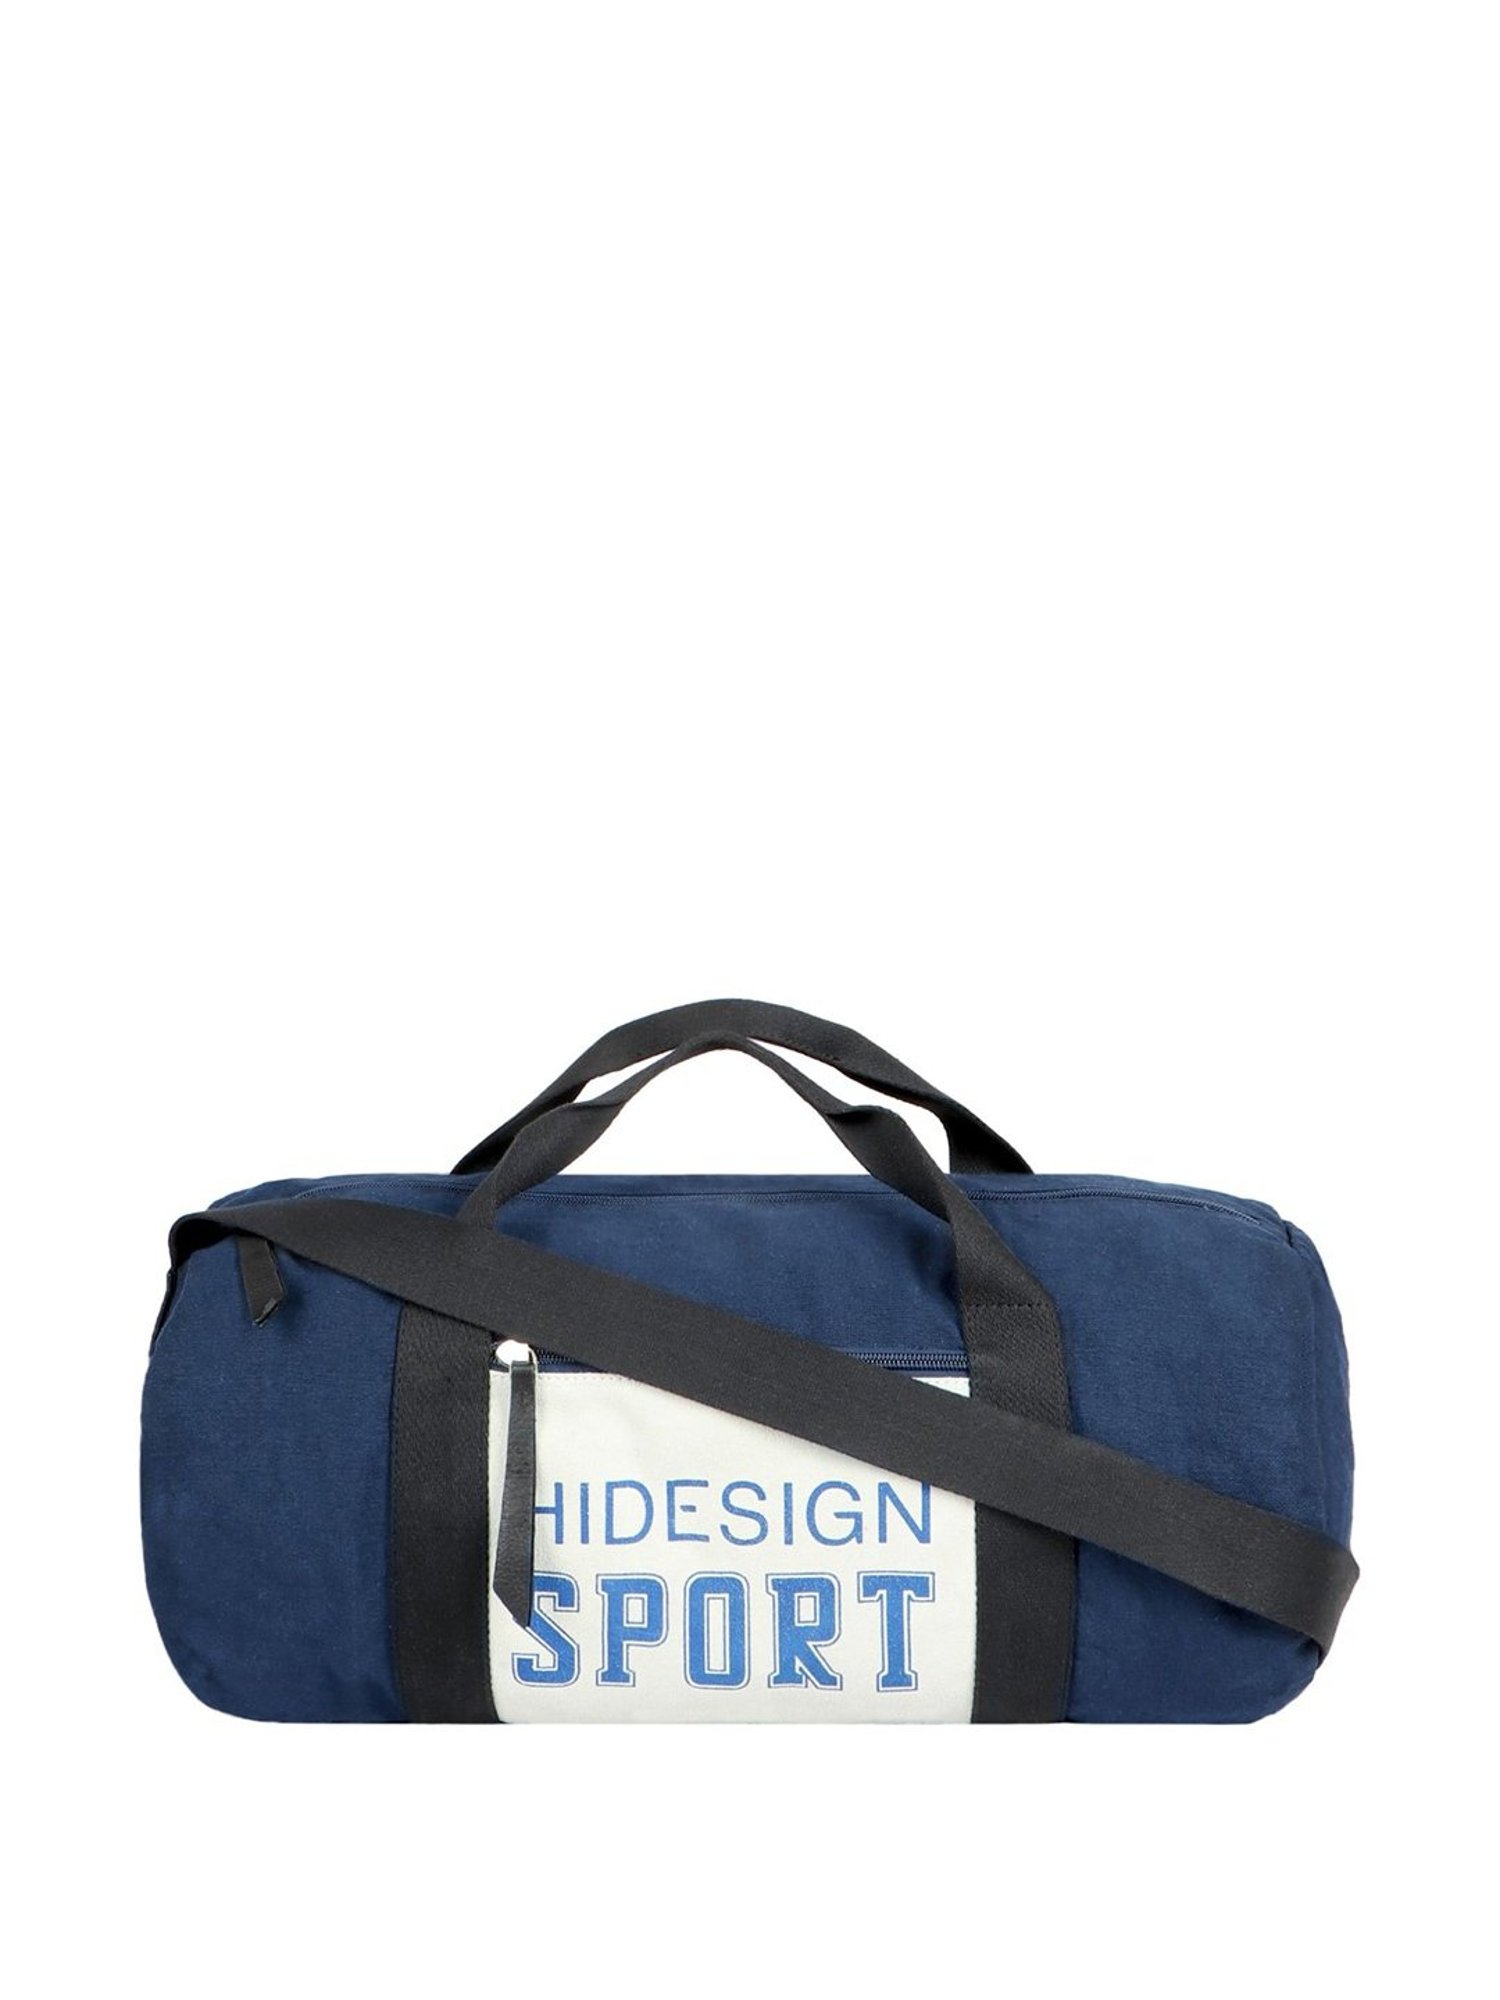 Buy Handcrafted Leather Travel Duffel Bags Online - Hidesign